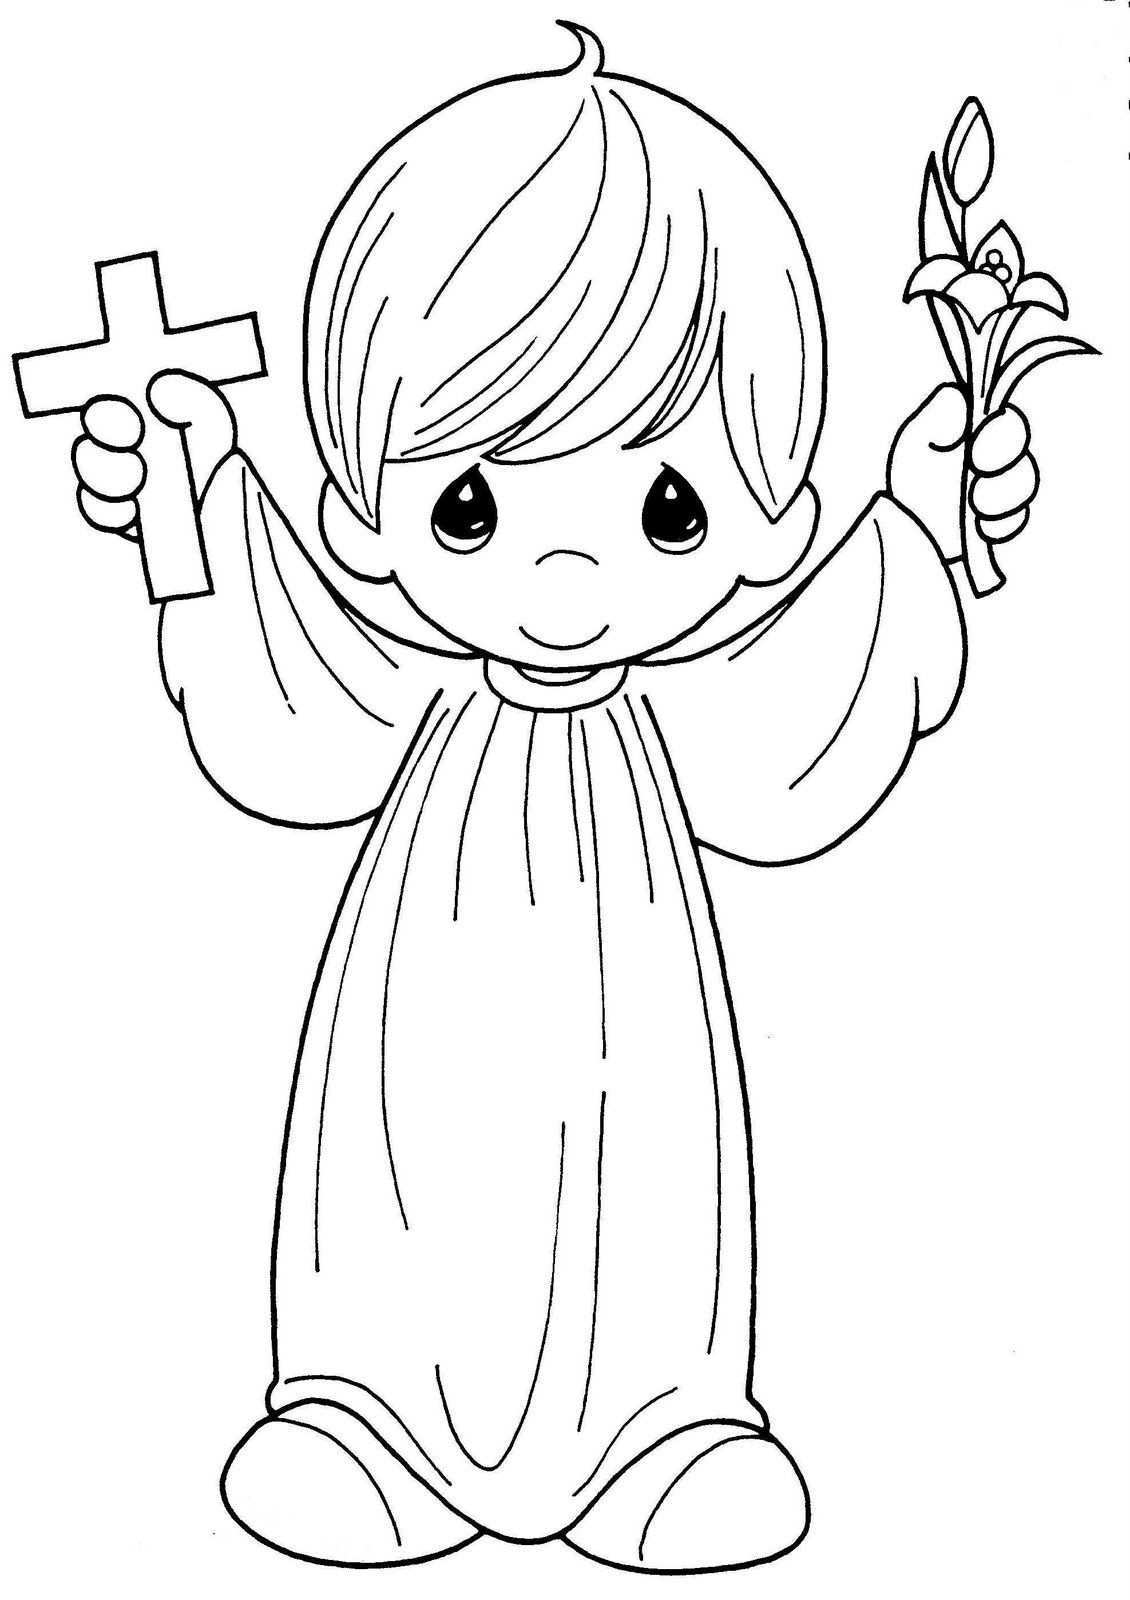 Precious Moments Coloring Pages Coloring For Kids Angel Coloring Pages Precious Momen